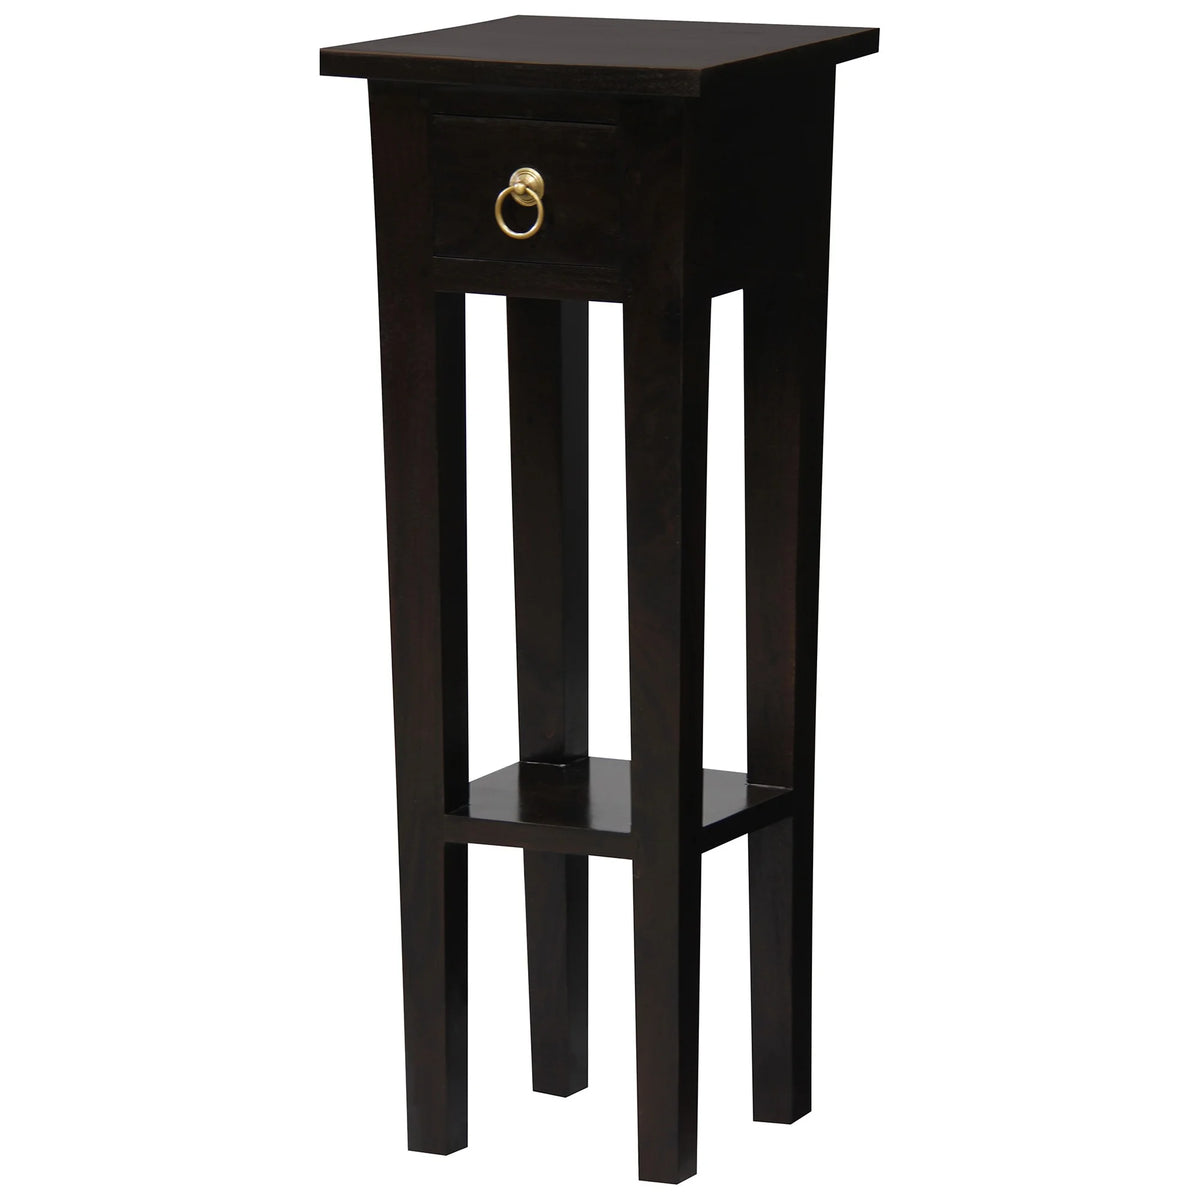 Fleur Timber 1 Drawer Plant Stand - Chocolate - Notbrand